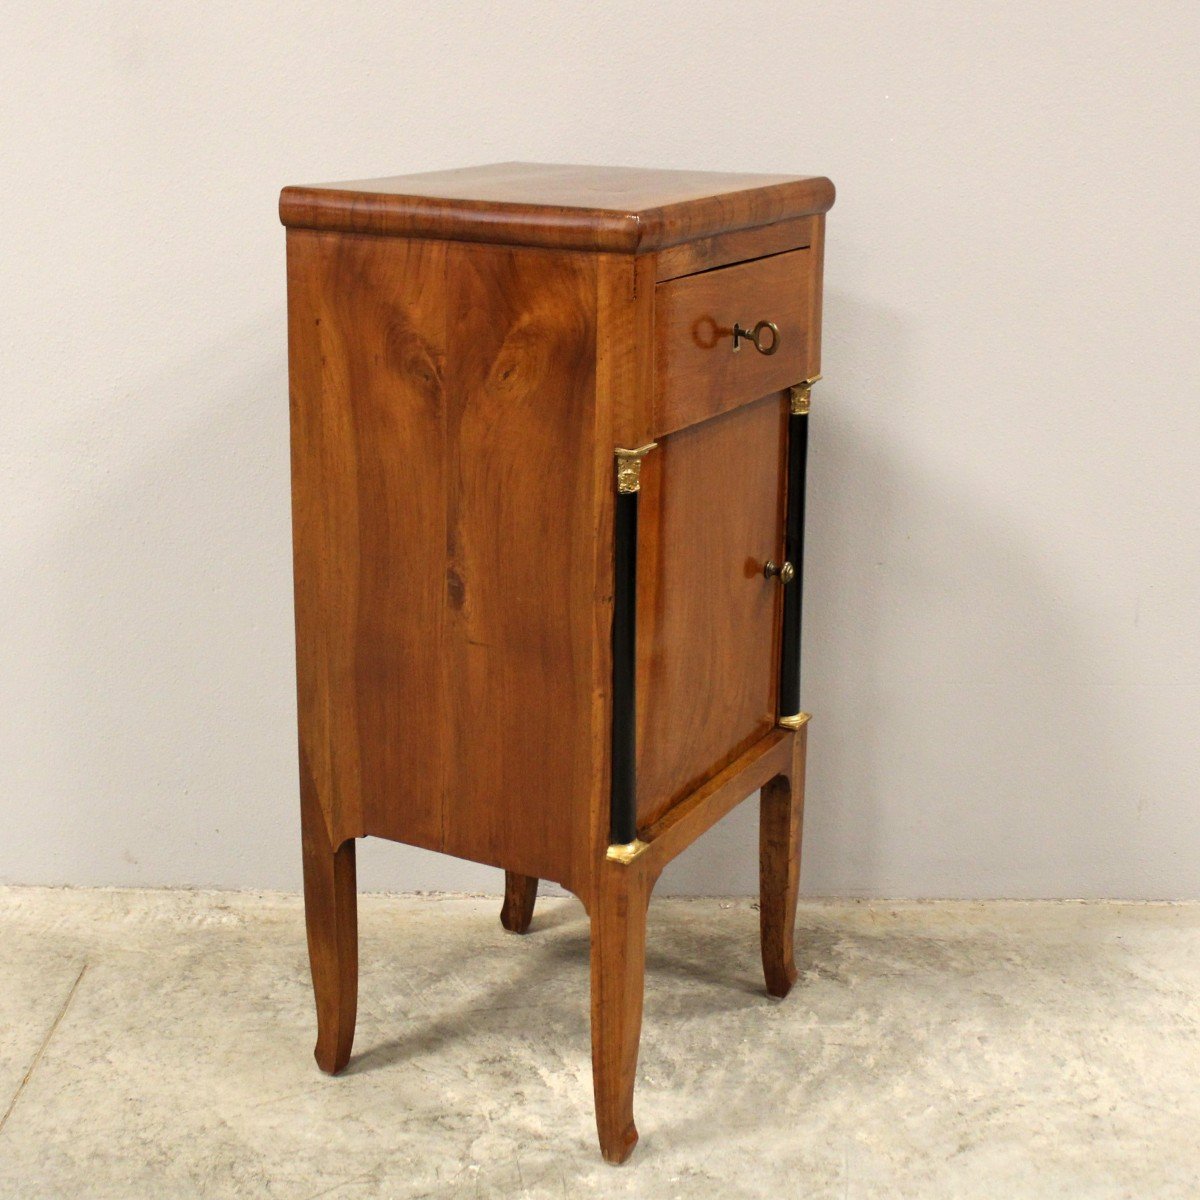 Antique Directoire Bedside Nightstand Table In Walnut - Italy 18th-photo-3